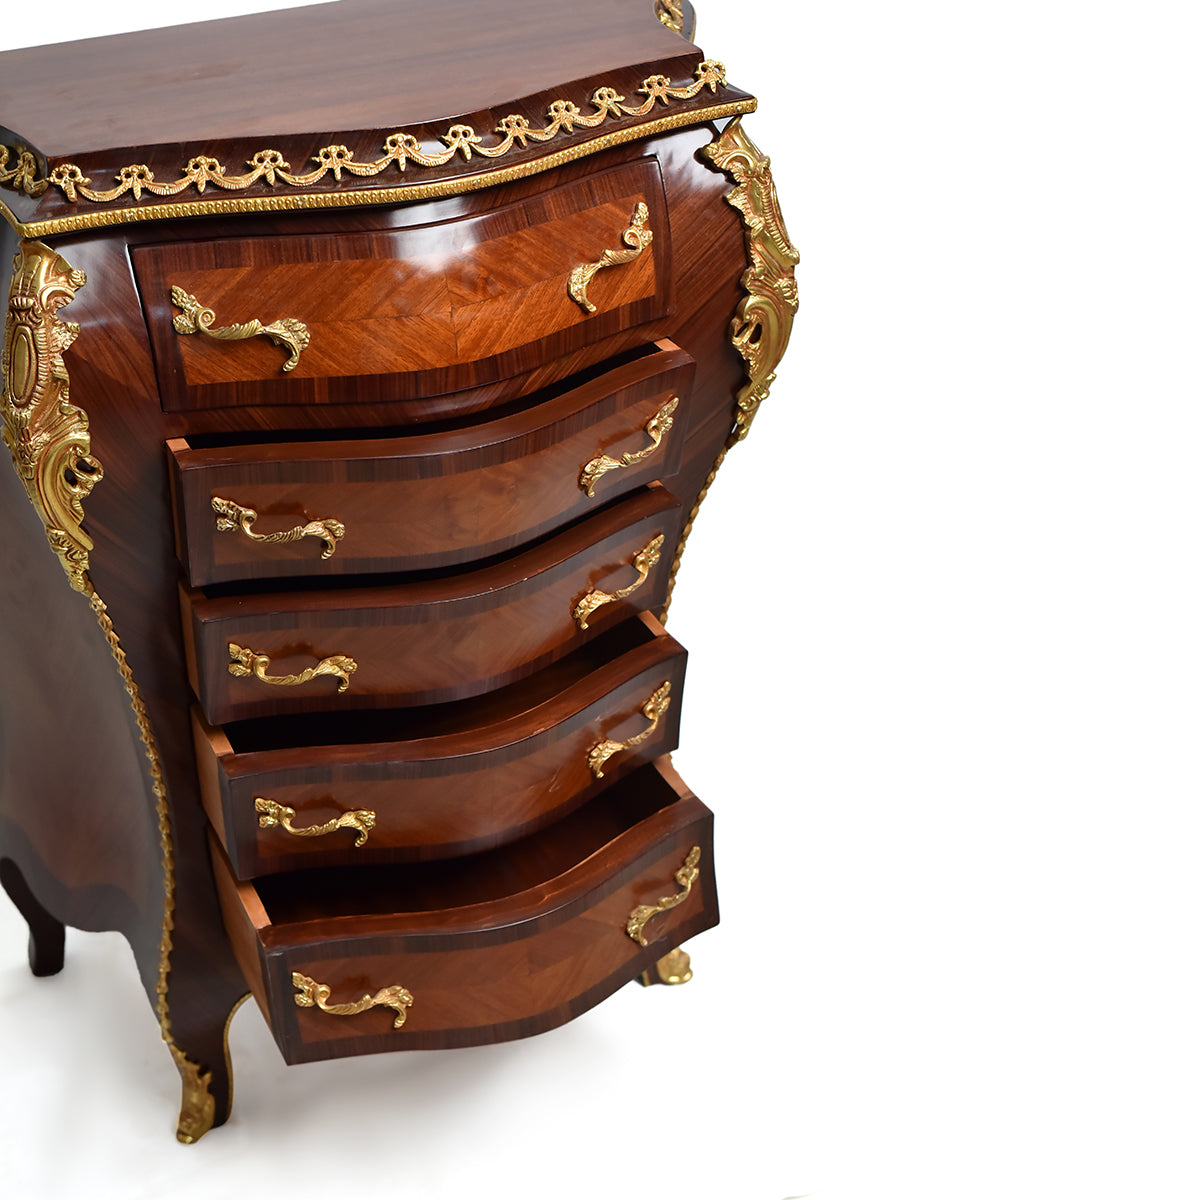 18th Century Rococo Style Bombe-Shaped drawer chest